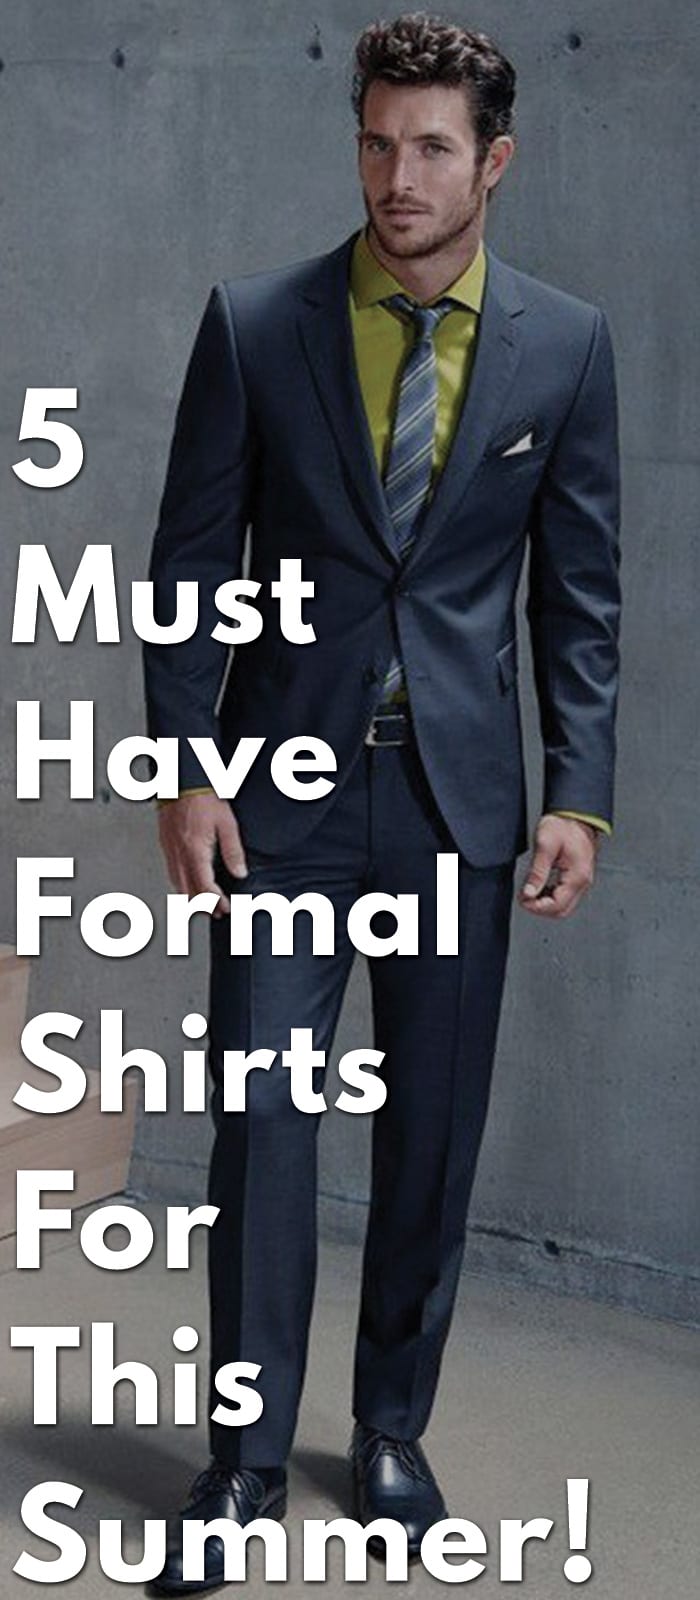 5-Must-Have-Formal-Shirts-For-This-Summer!